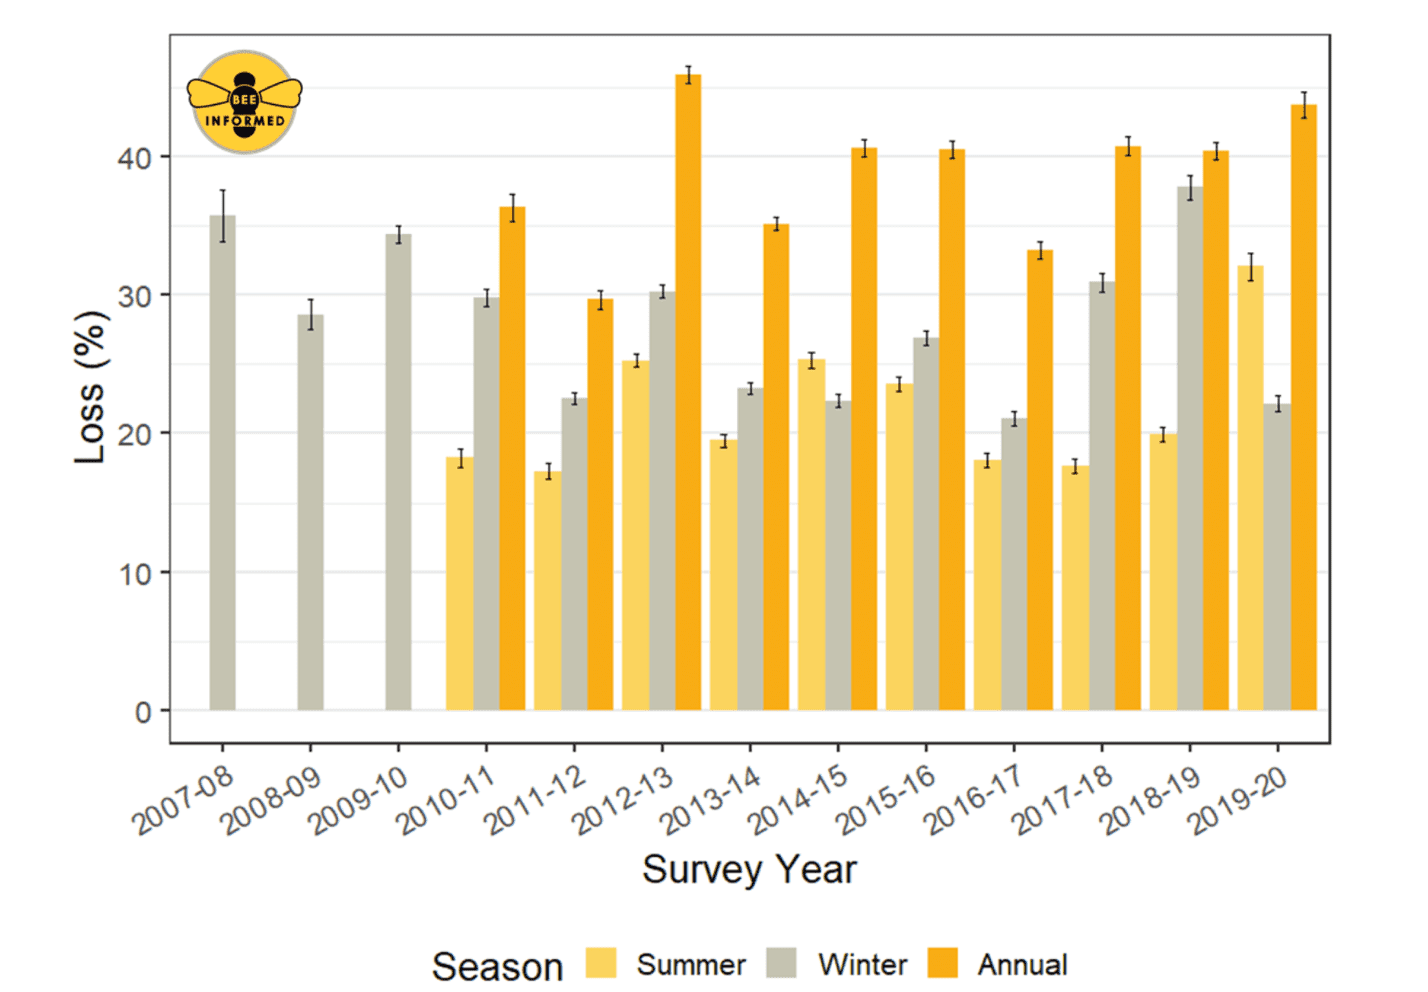 Summer, winter and annual (mean %) U.S. honey bee colony loss rates calculated from 2007-2020 Annual U.S. Colony Loss and Management Survey Data.